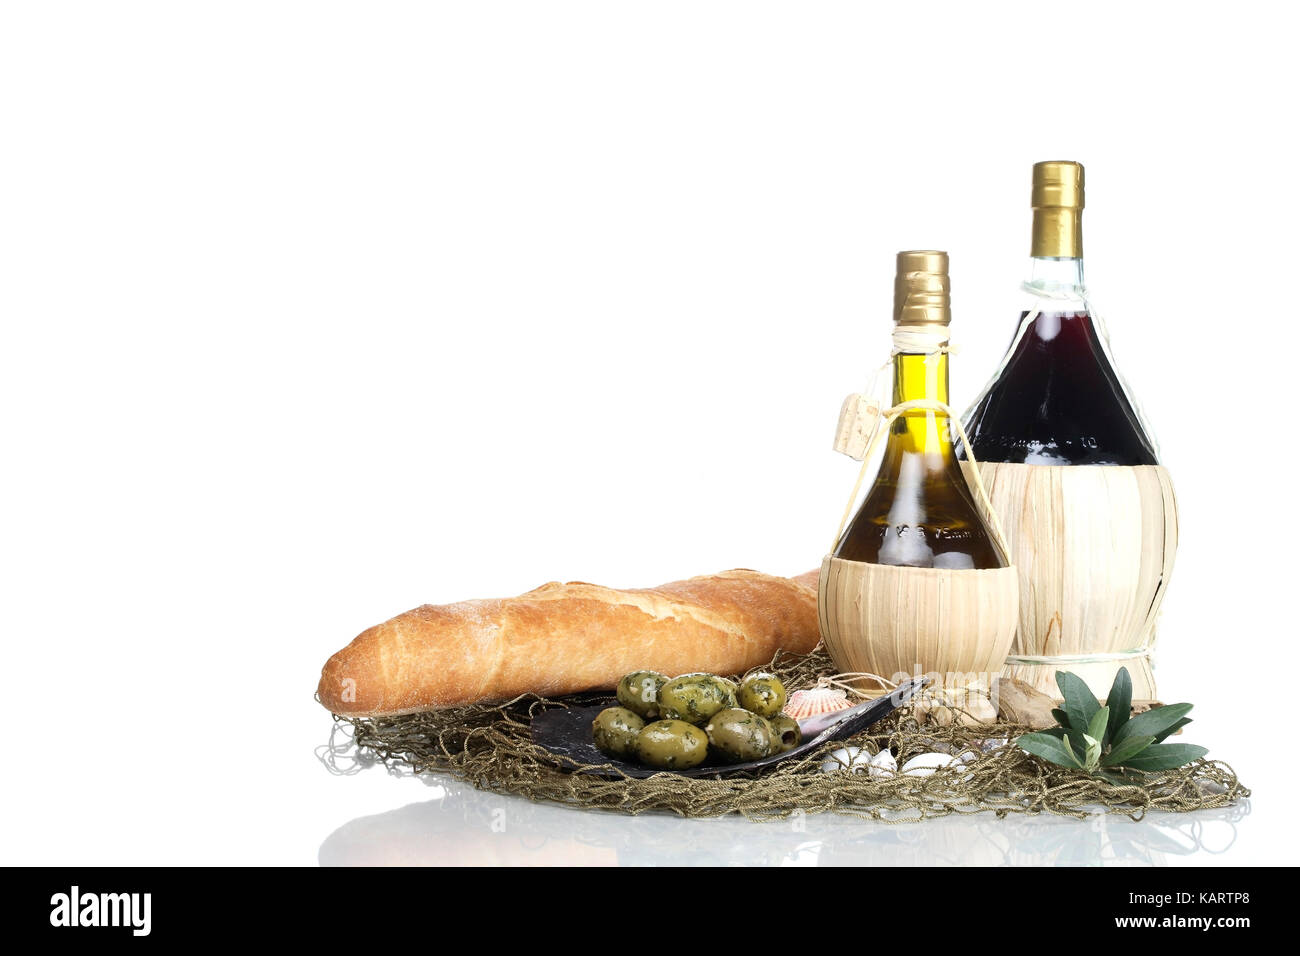 Geesthacht, olives, olive oil, wine and bread, Oliven, Olivenoel, Wein und Brot Stock Photo